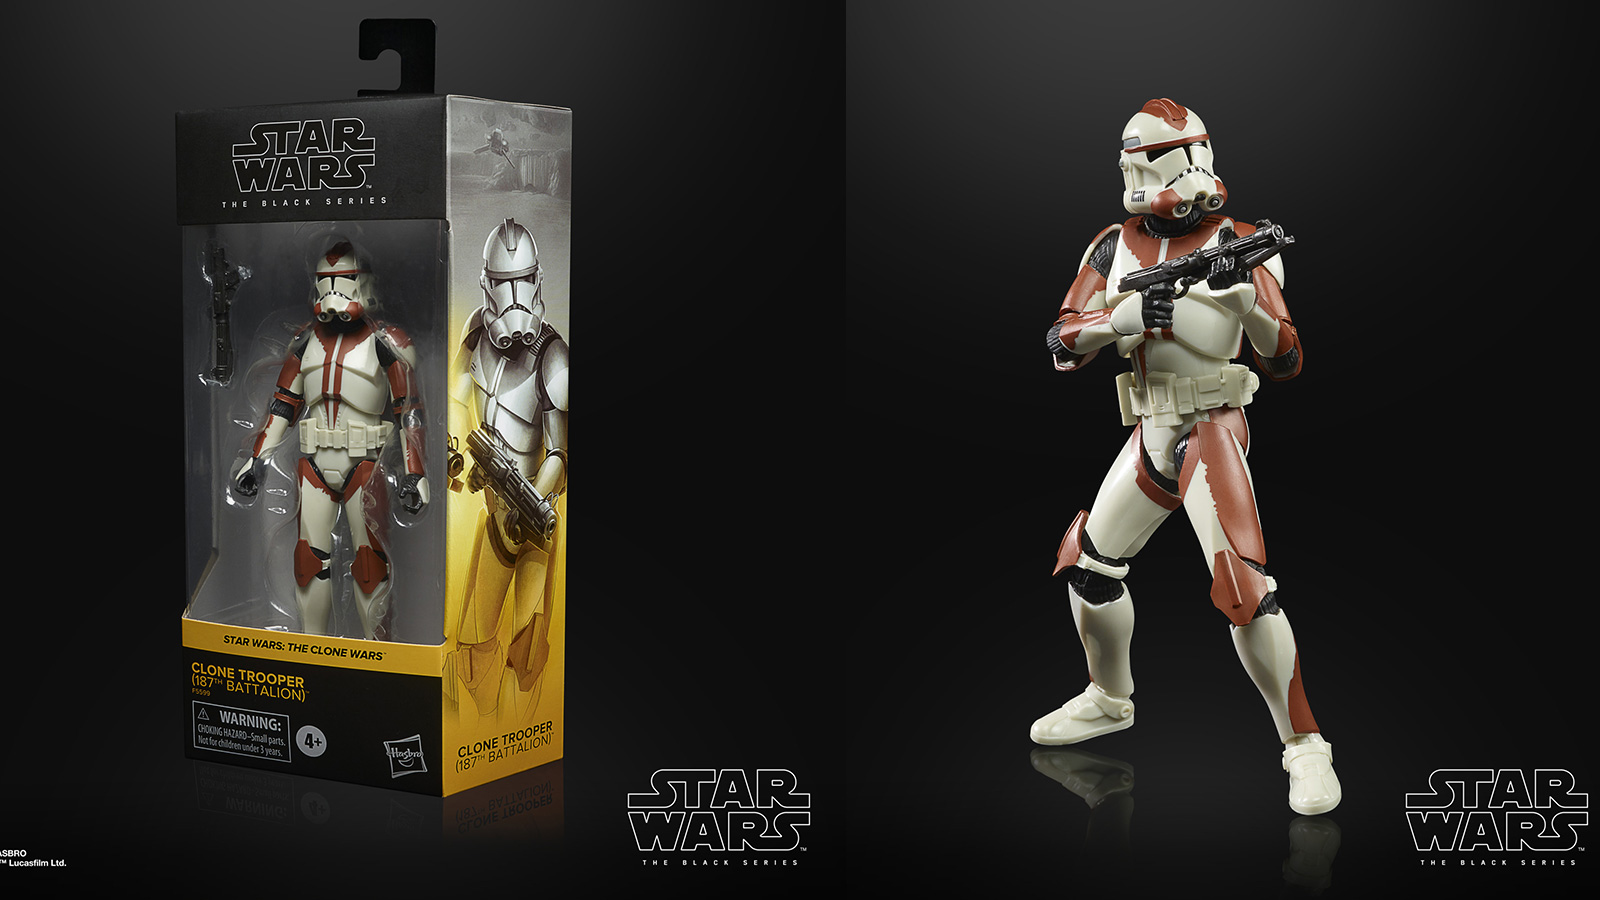 In Stock At Walgreens - Exclusive The Black Series 6-Inch Clone Trooper (187th Battalion) Figure